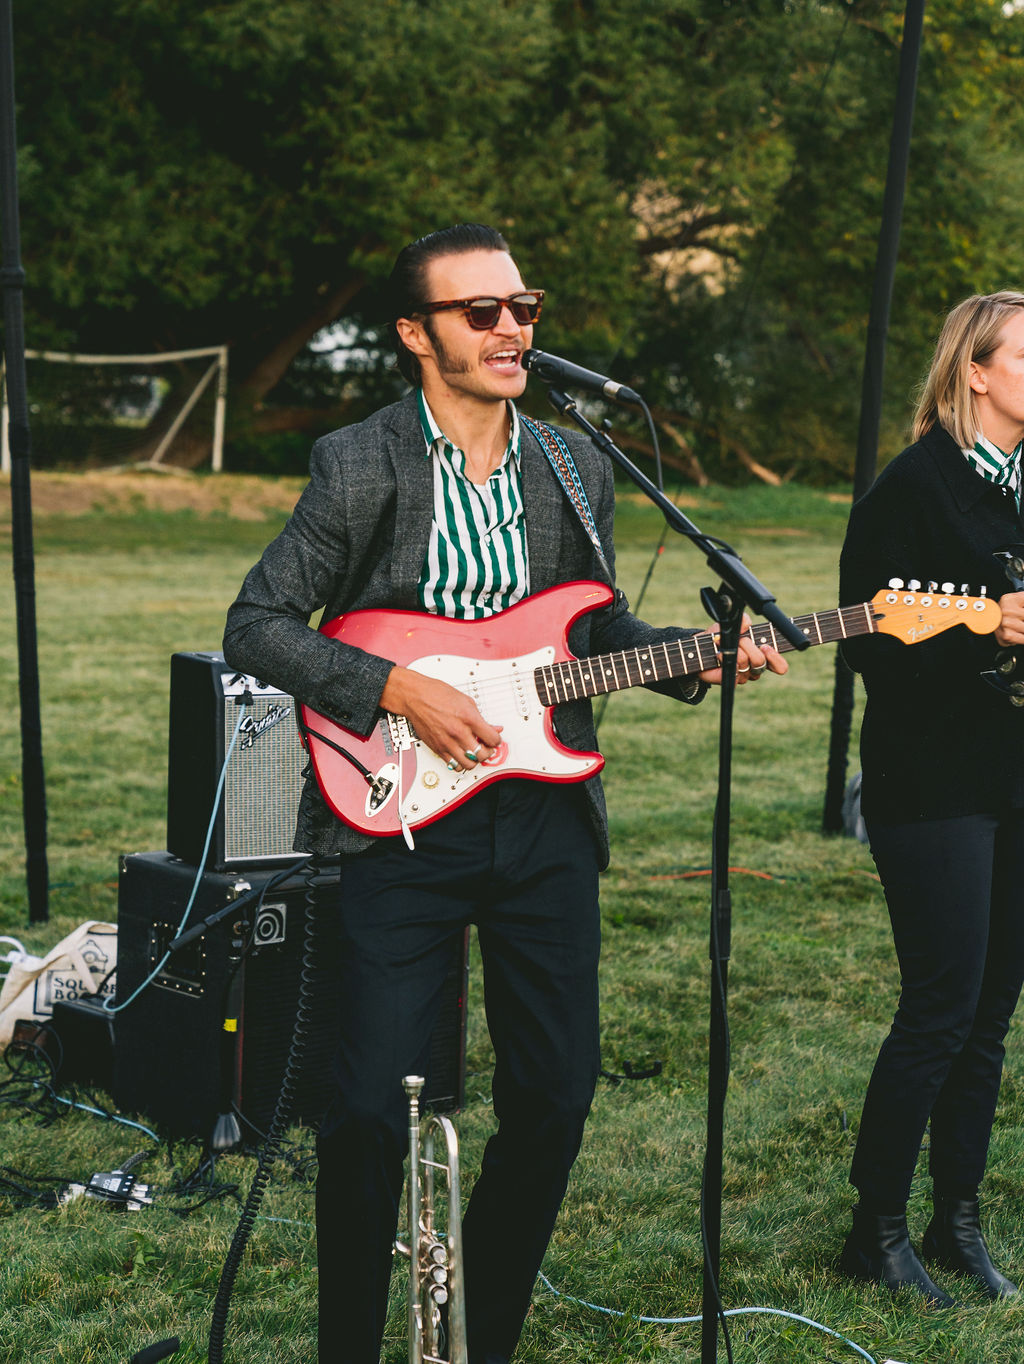 A band performs live music during a wedding reception planned by Kaushay & Co., a event planning company in Utah. Unique wedding ideas reception with live music wedding planning tips #boldandcolorfulweddings #uniqueweddings #memorableweddings #utahweddingplanner